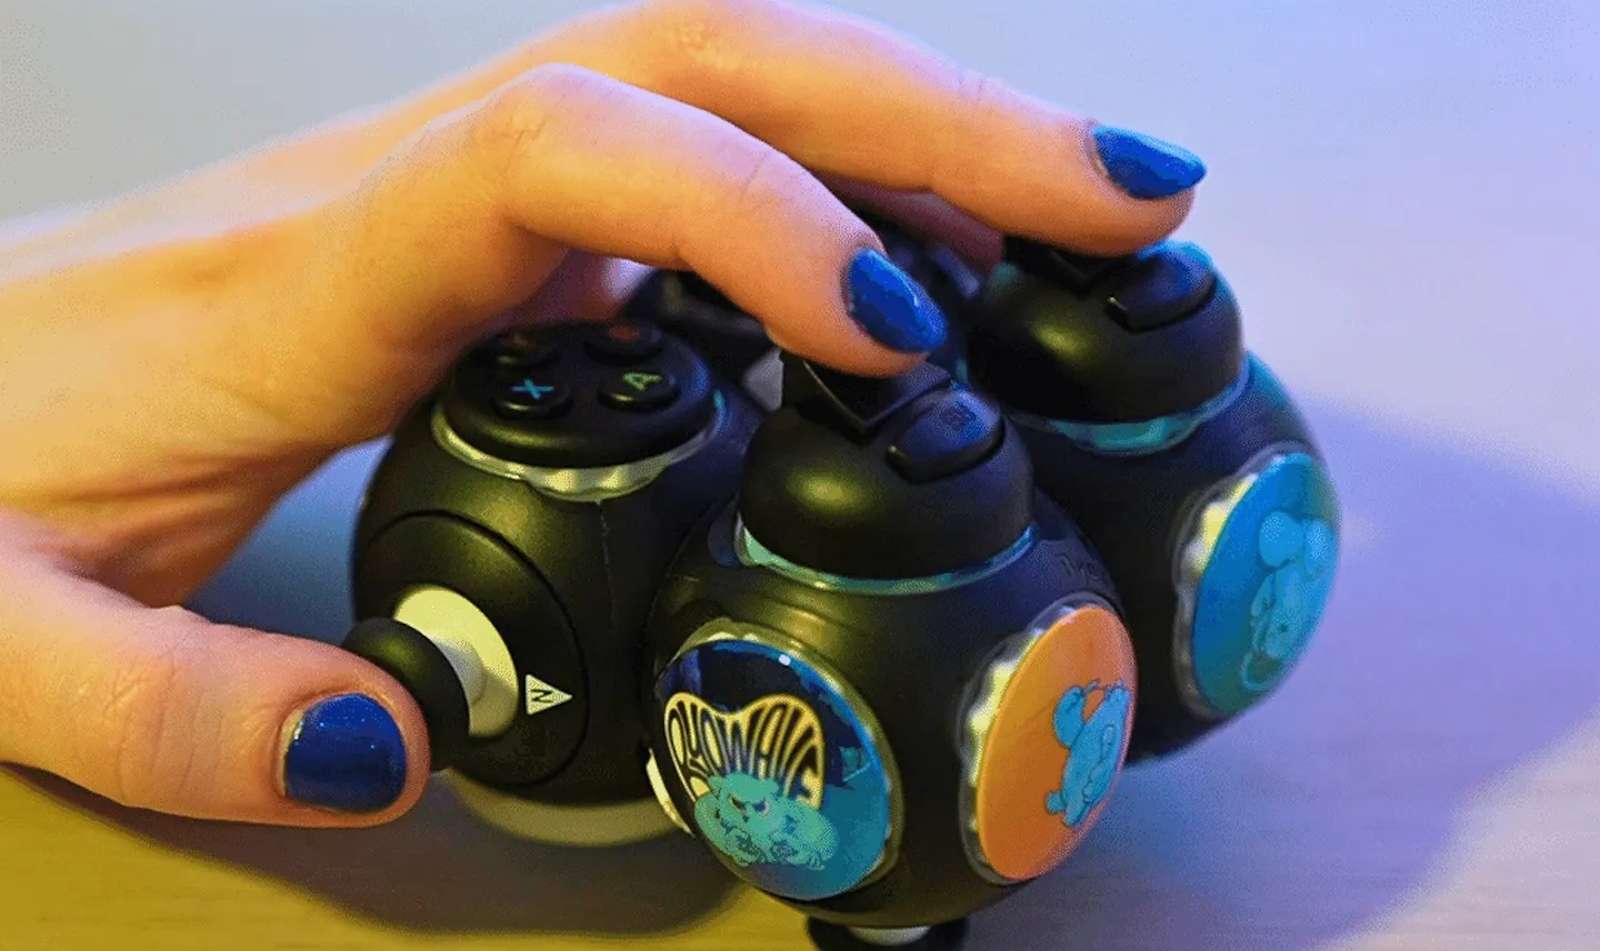 Microsoft Announces Proteus, an Xbox Game Controller Designed for People with Disabilities